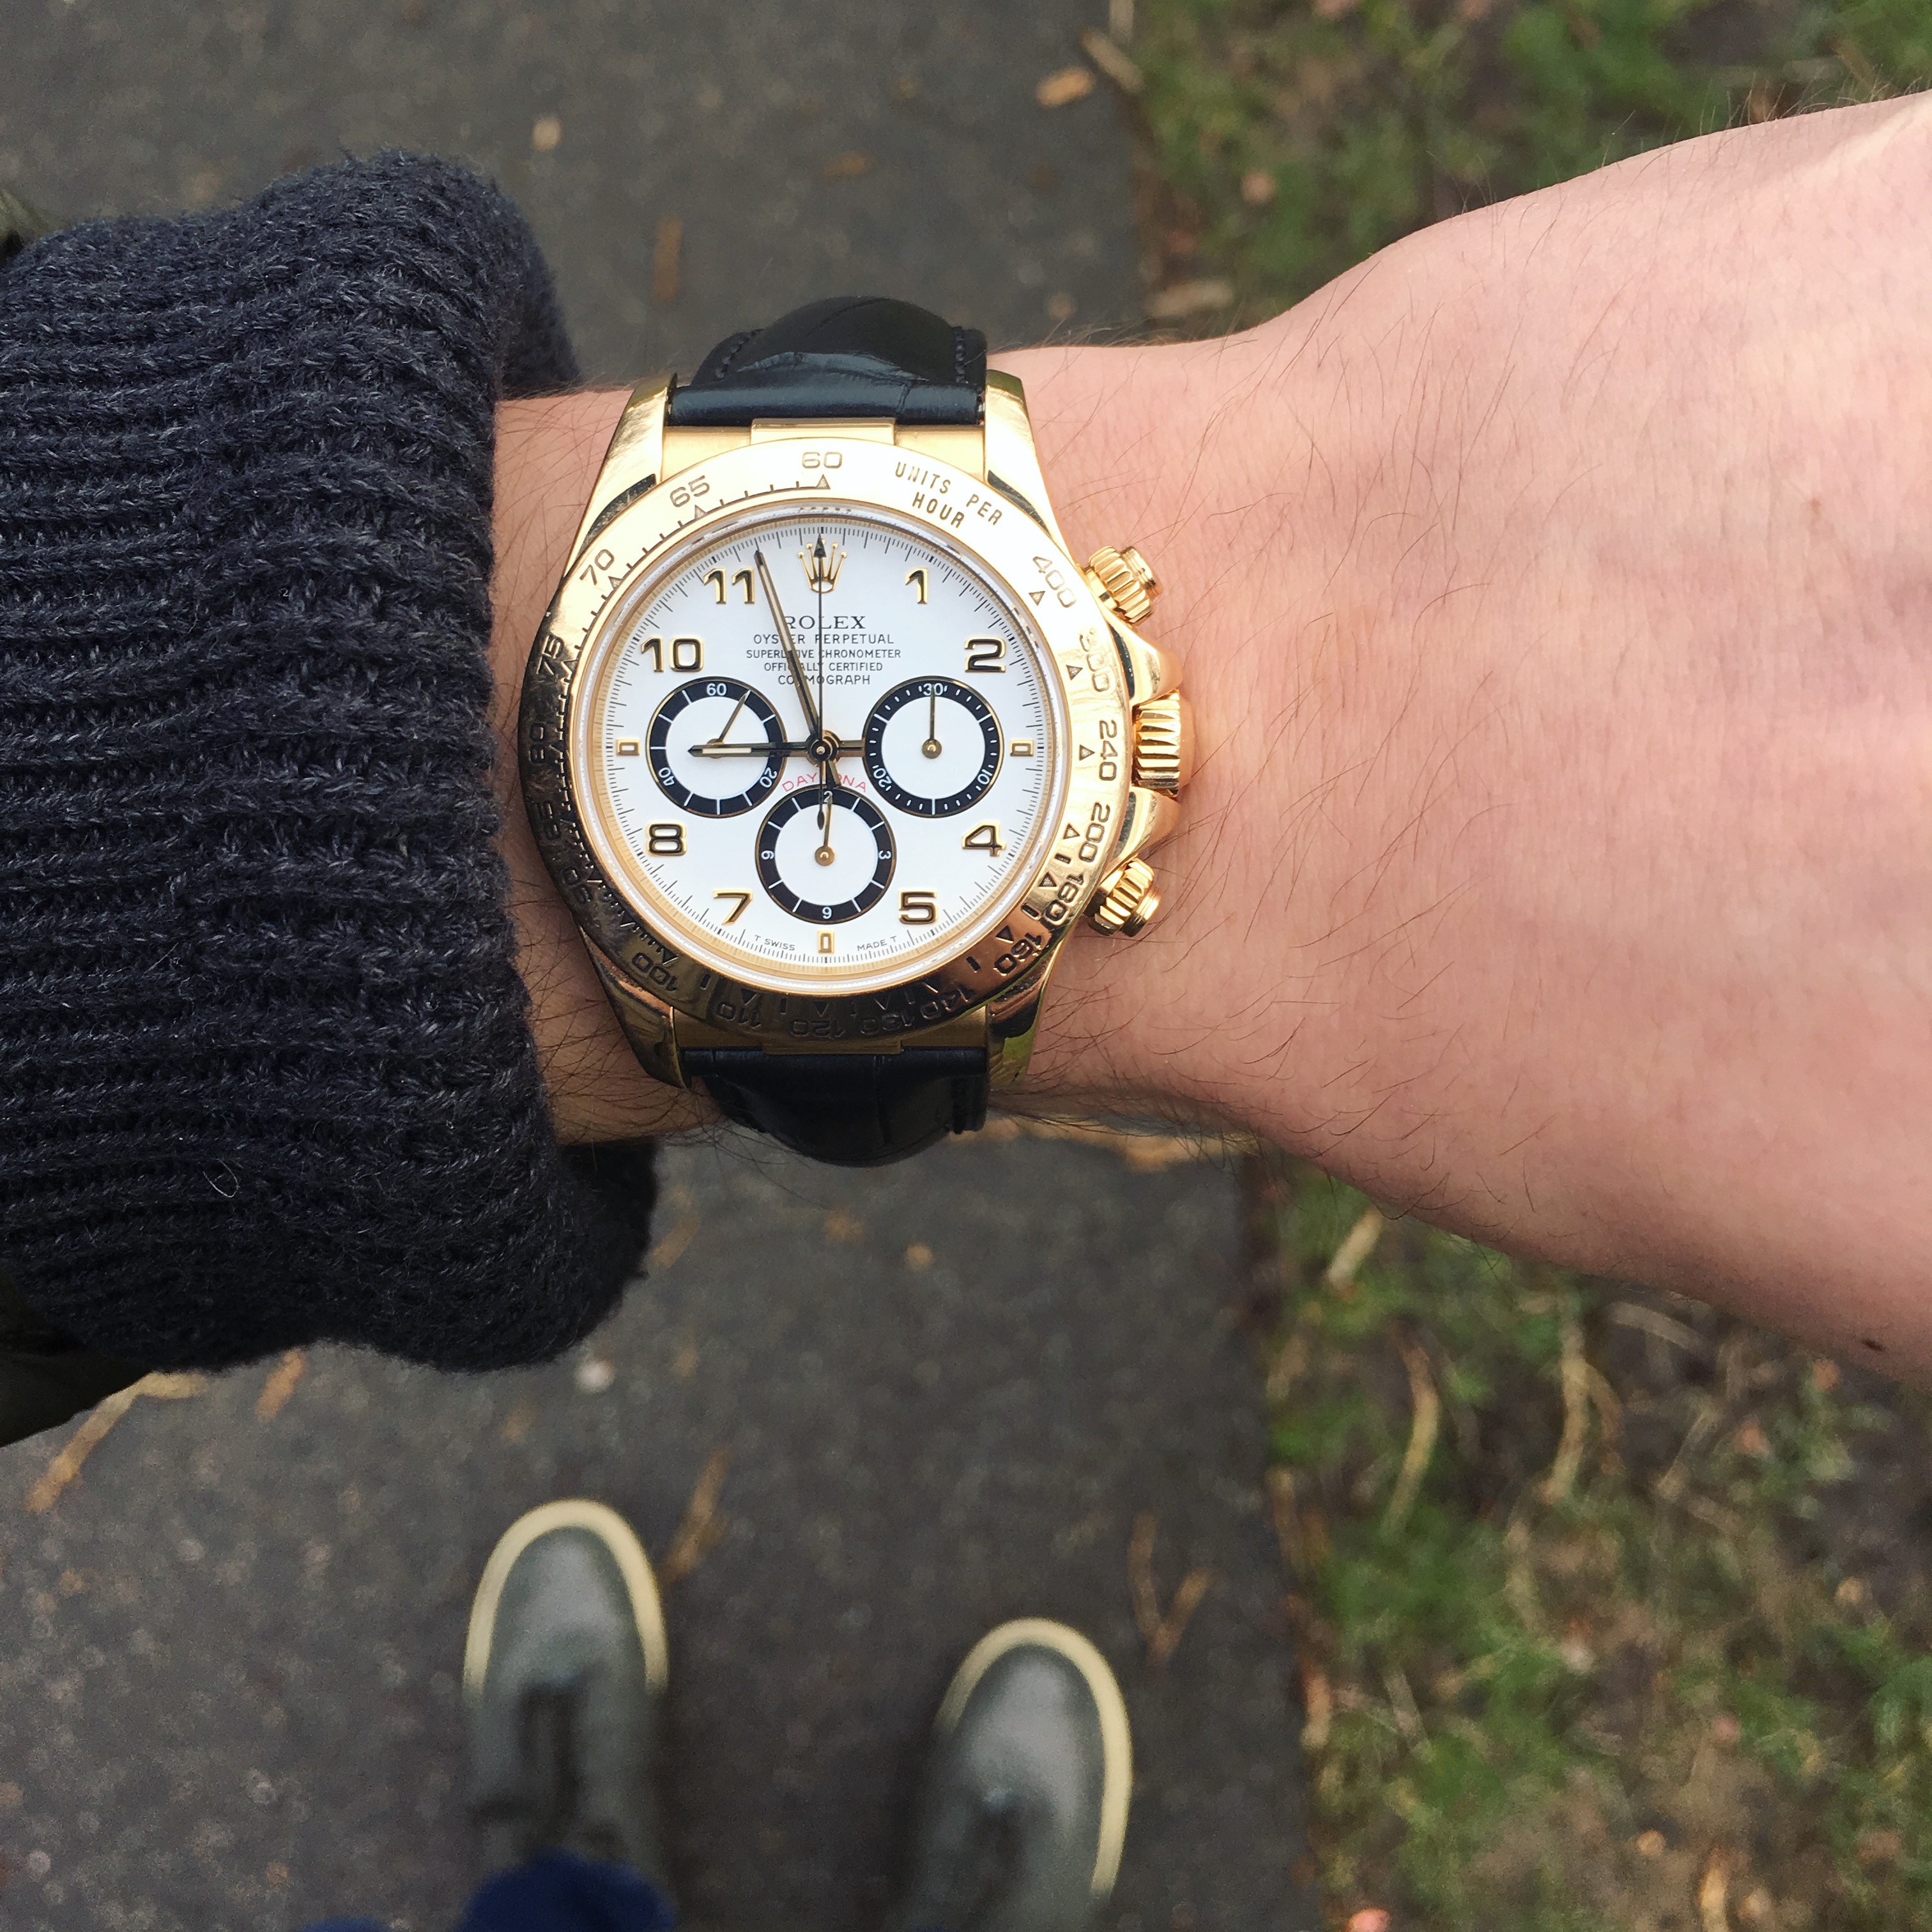 Two weeks with a solid gold Rolex watch as daily wearer